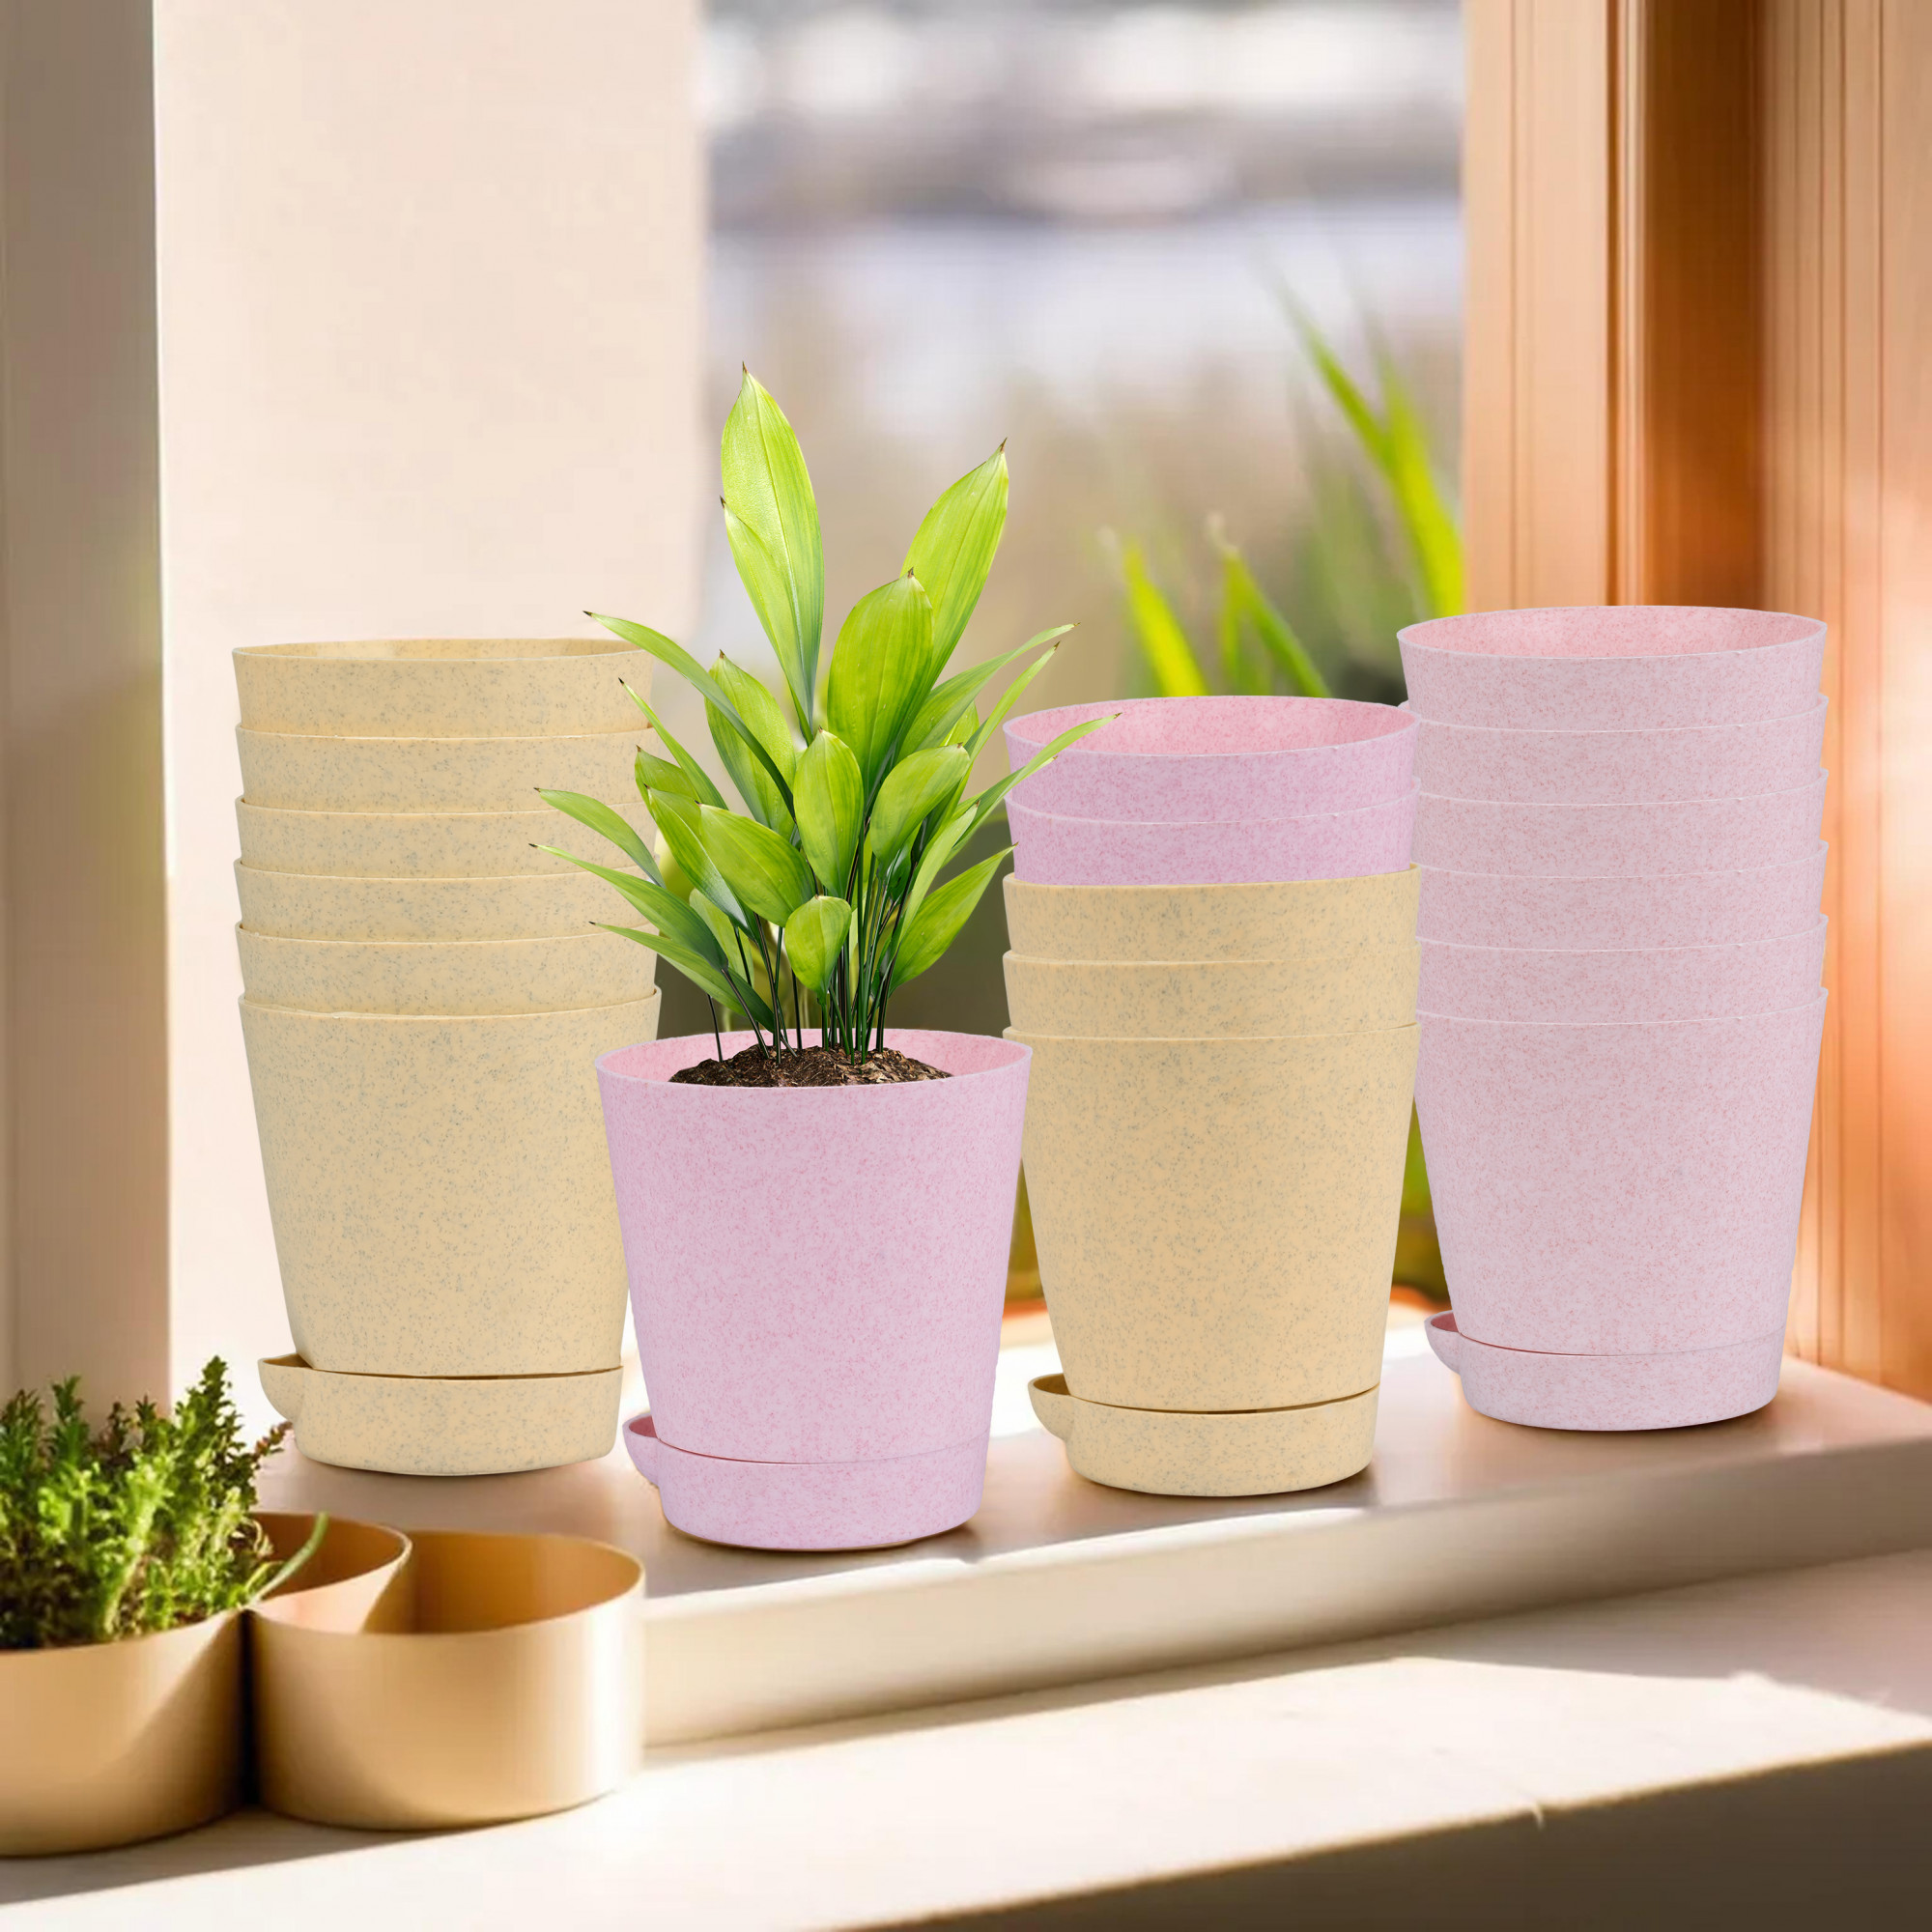 Kuber Industries Flower Pot | Flower Pot for Living Room-Office | Planters for Home-office-Lawns & Garden Décor | Self Watering Flower Planters Pots | Marble Titan | 4 Inch | Beige & Pink